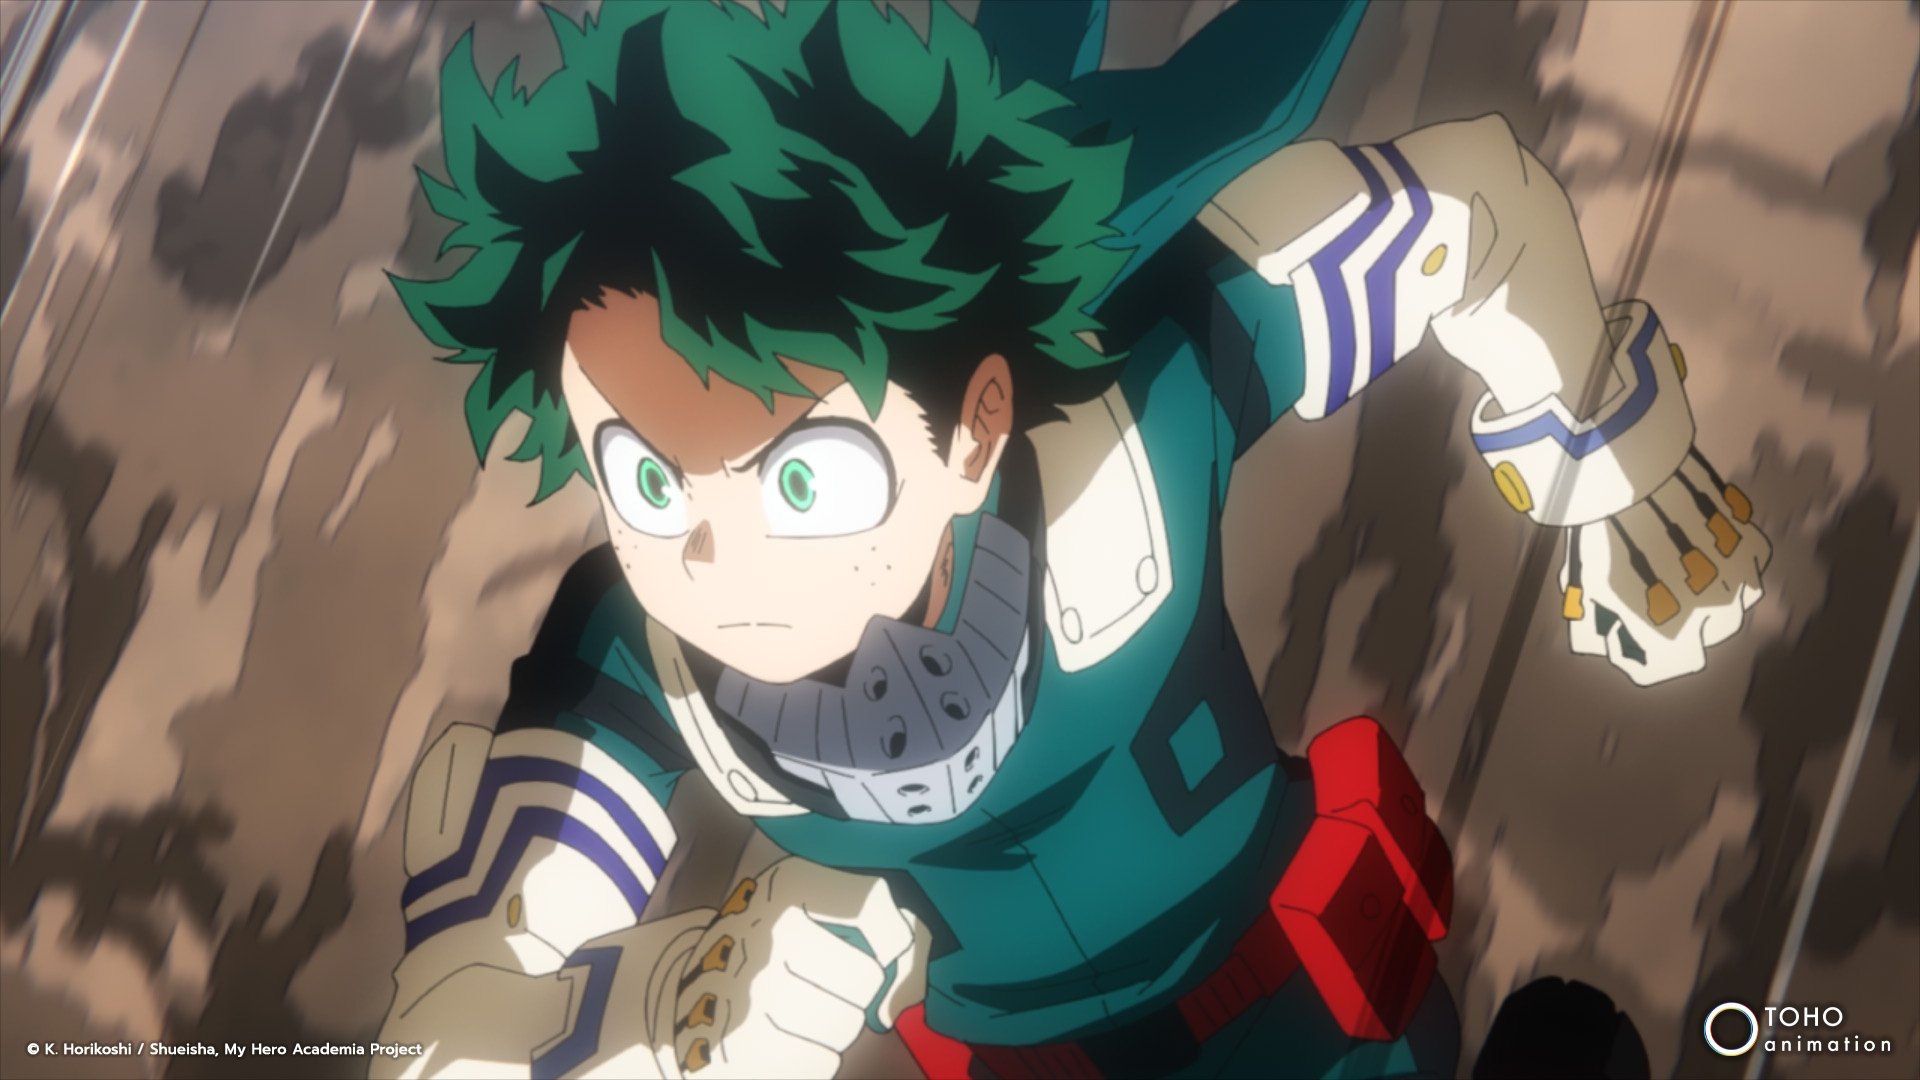 Check out 'My Hero Academia' season 6 for the list of best anime of 2022. It shows Deku running down a dirt hill.